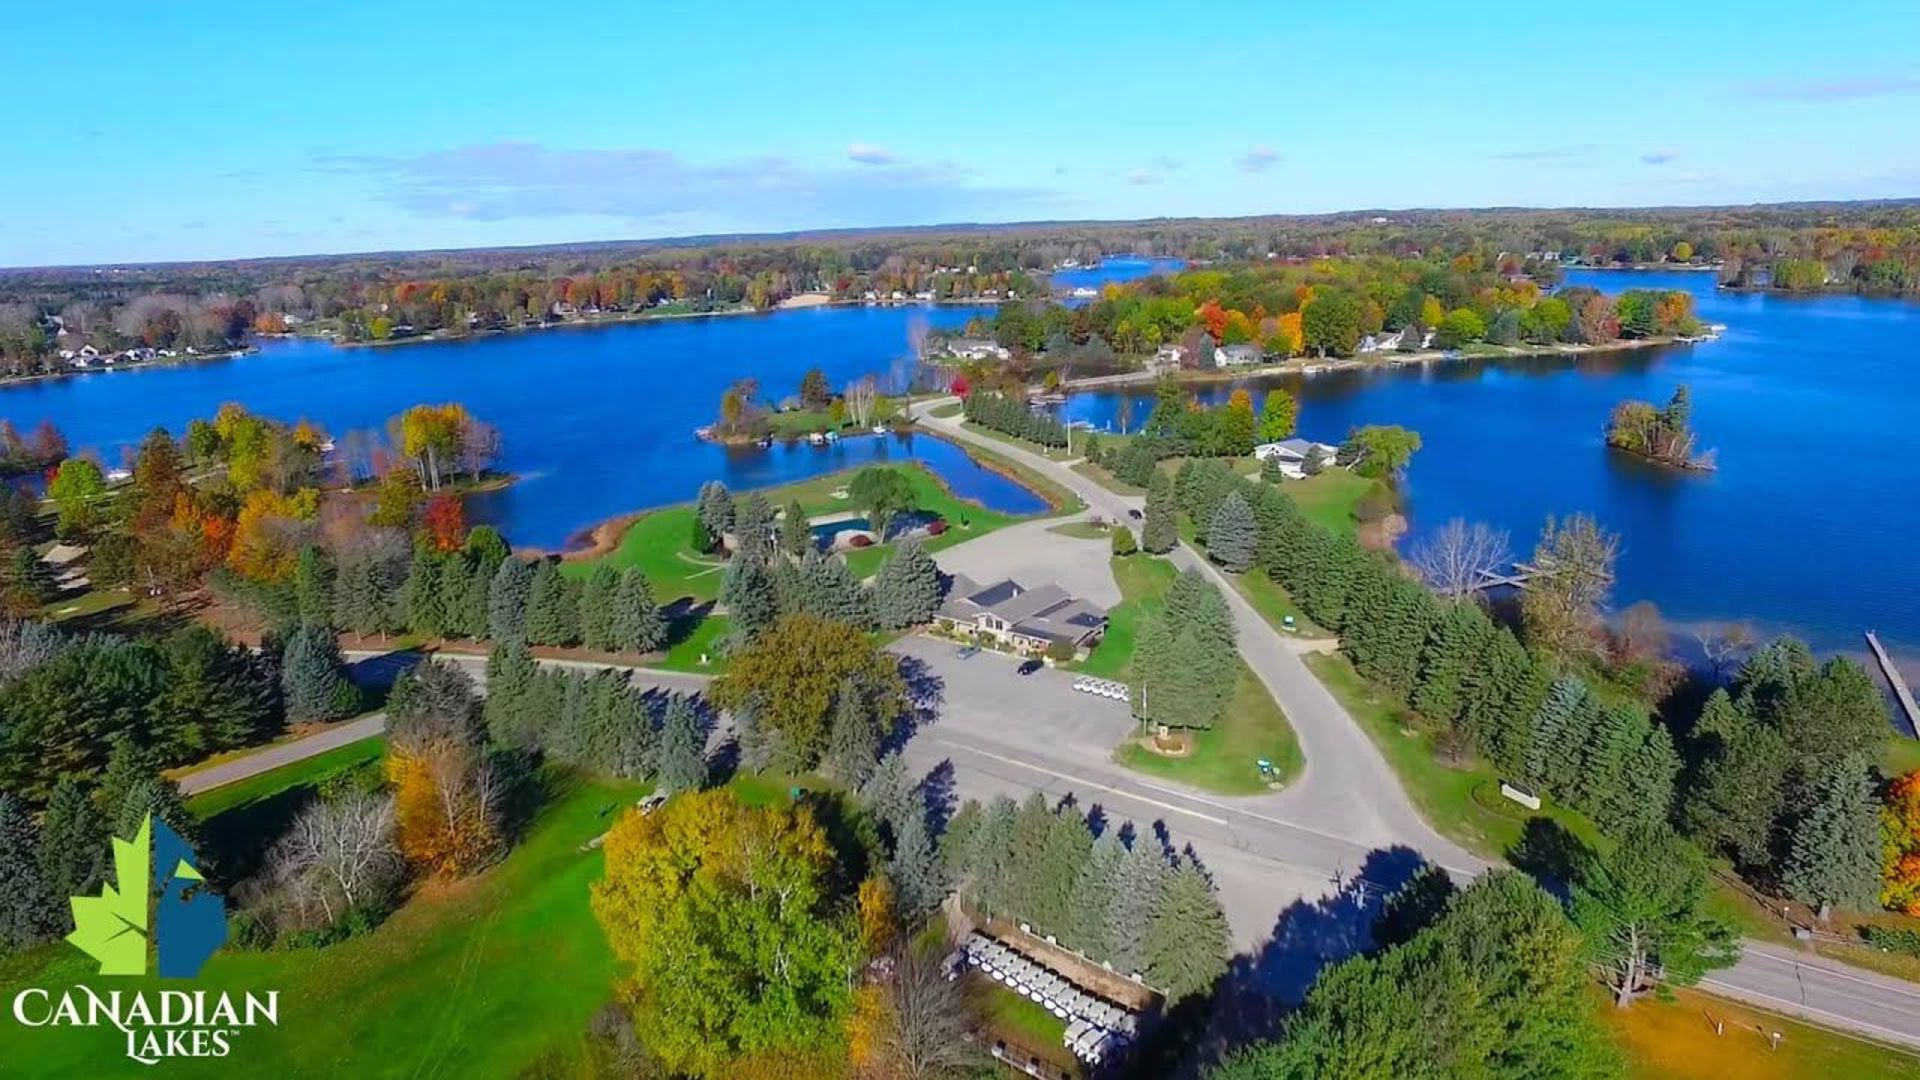 Construct Your Perfect Home in Canadian Lakes, Michigan! - Image 2 of 15